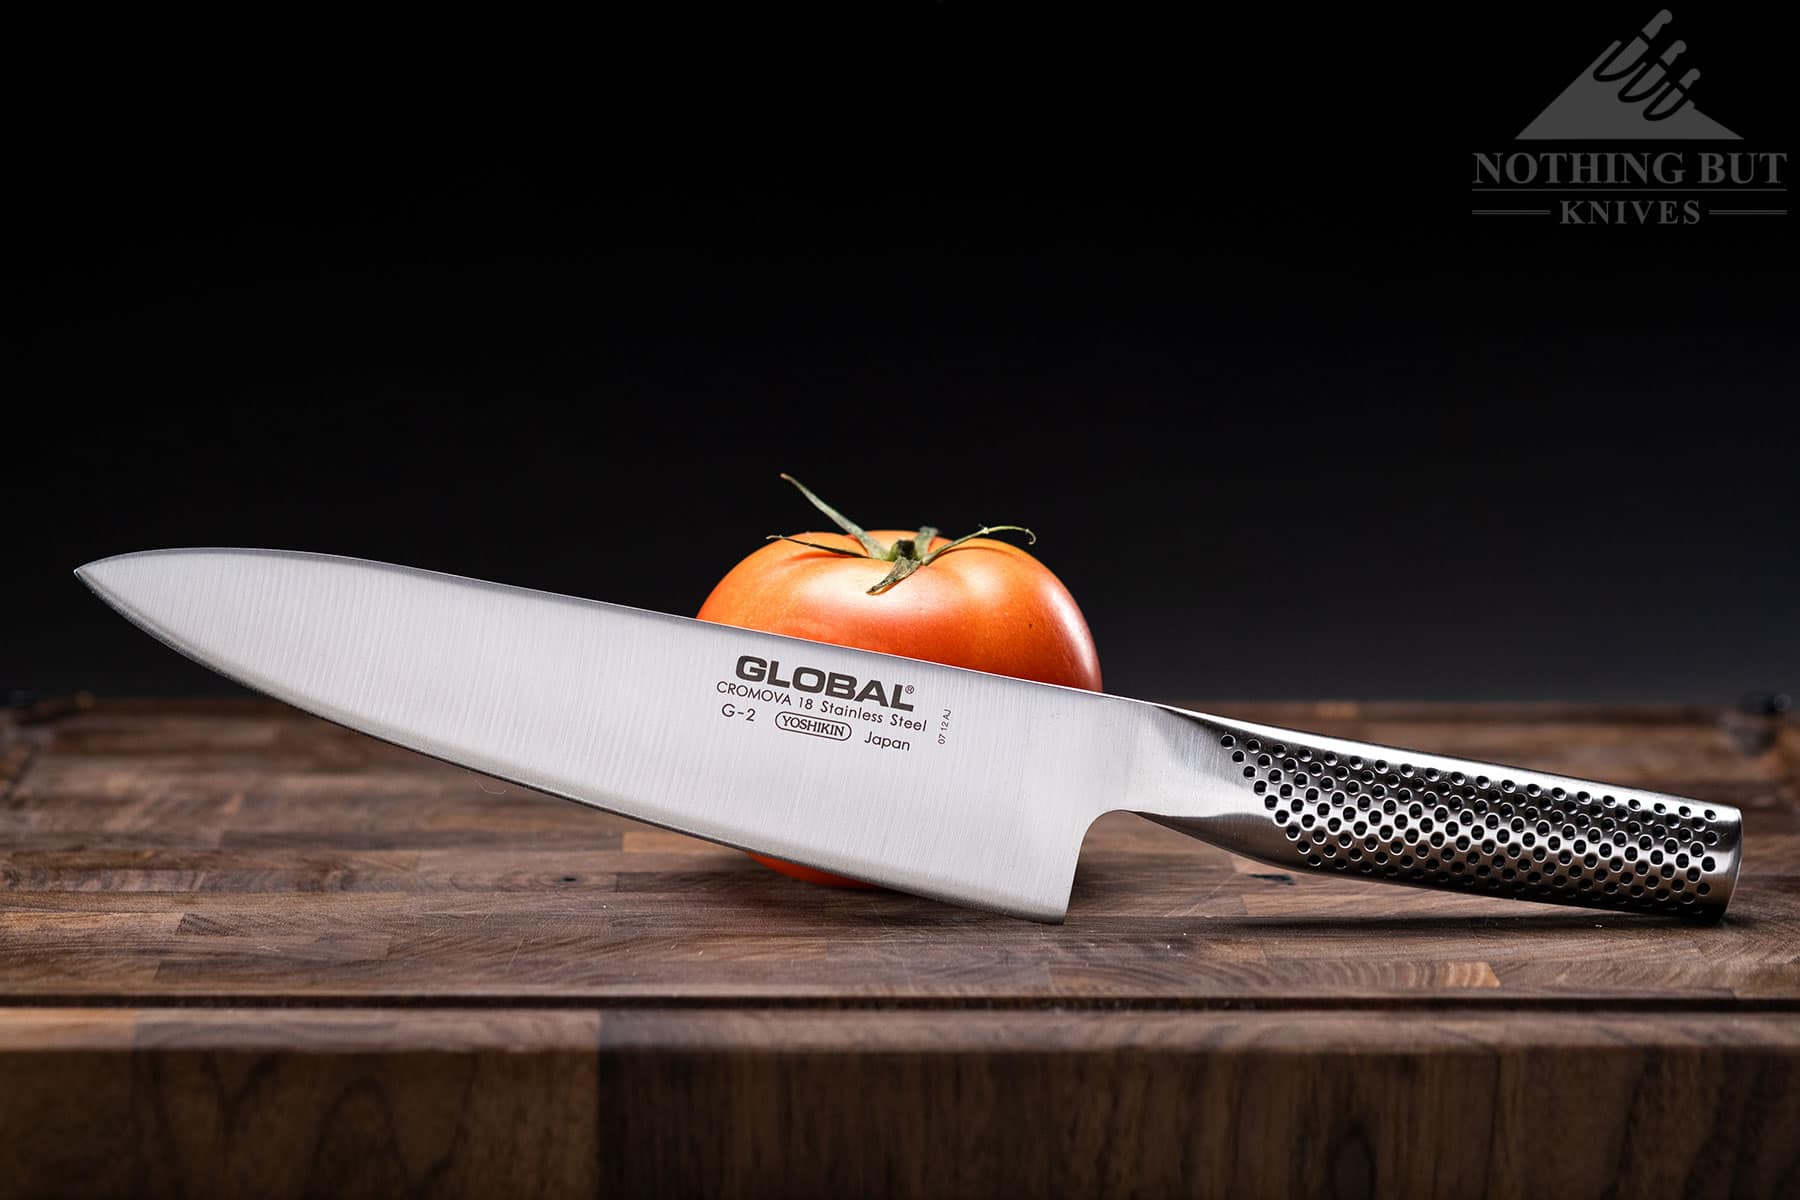 Aikido Steel Review: Are Knives Scam Or Legit? - Blades Power